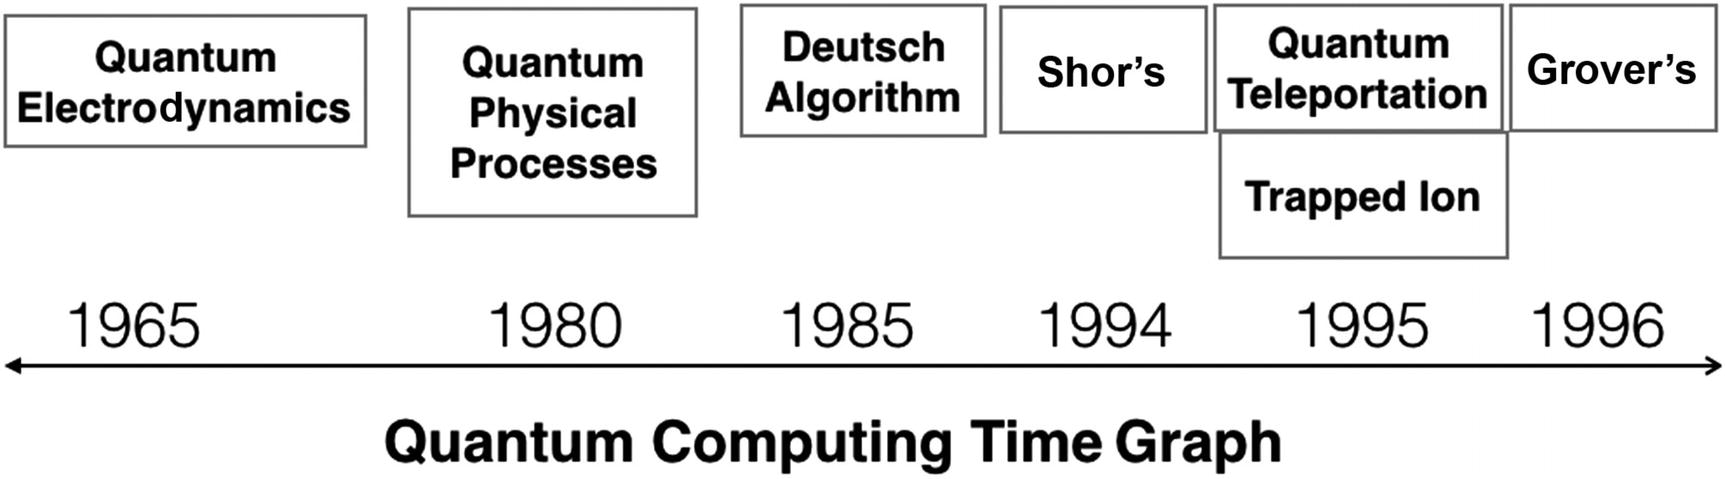 Figure 1-1 Quantum computing time graph He came up with new concepts related - photo 3